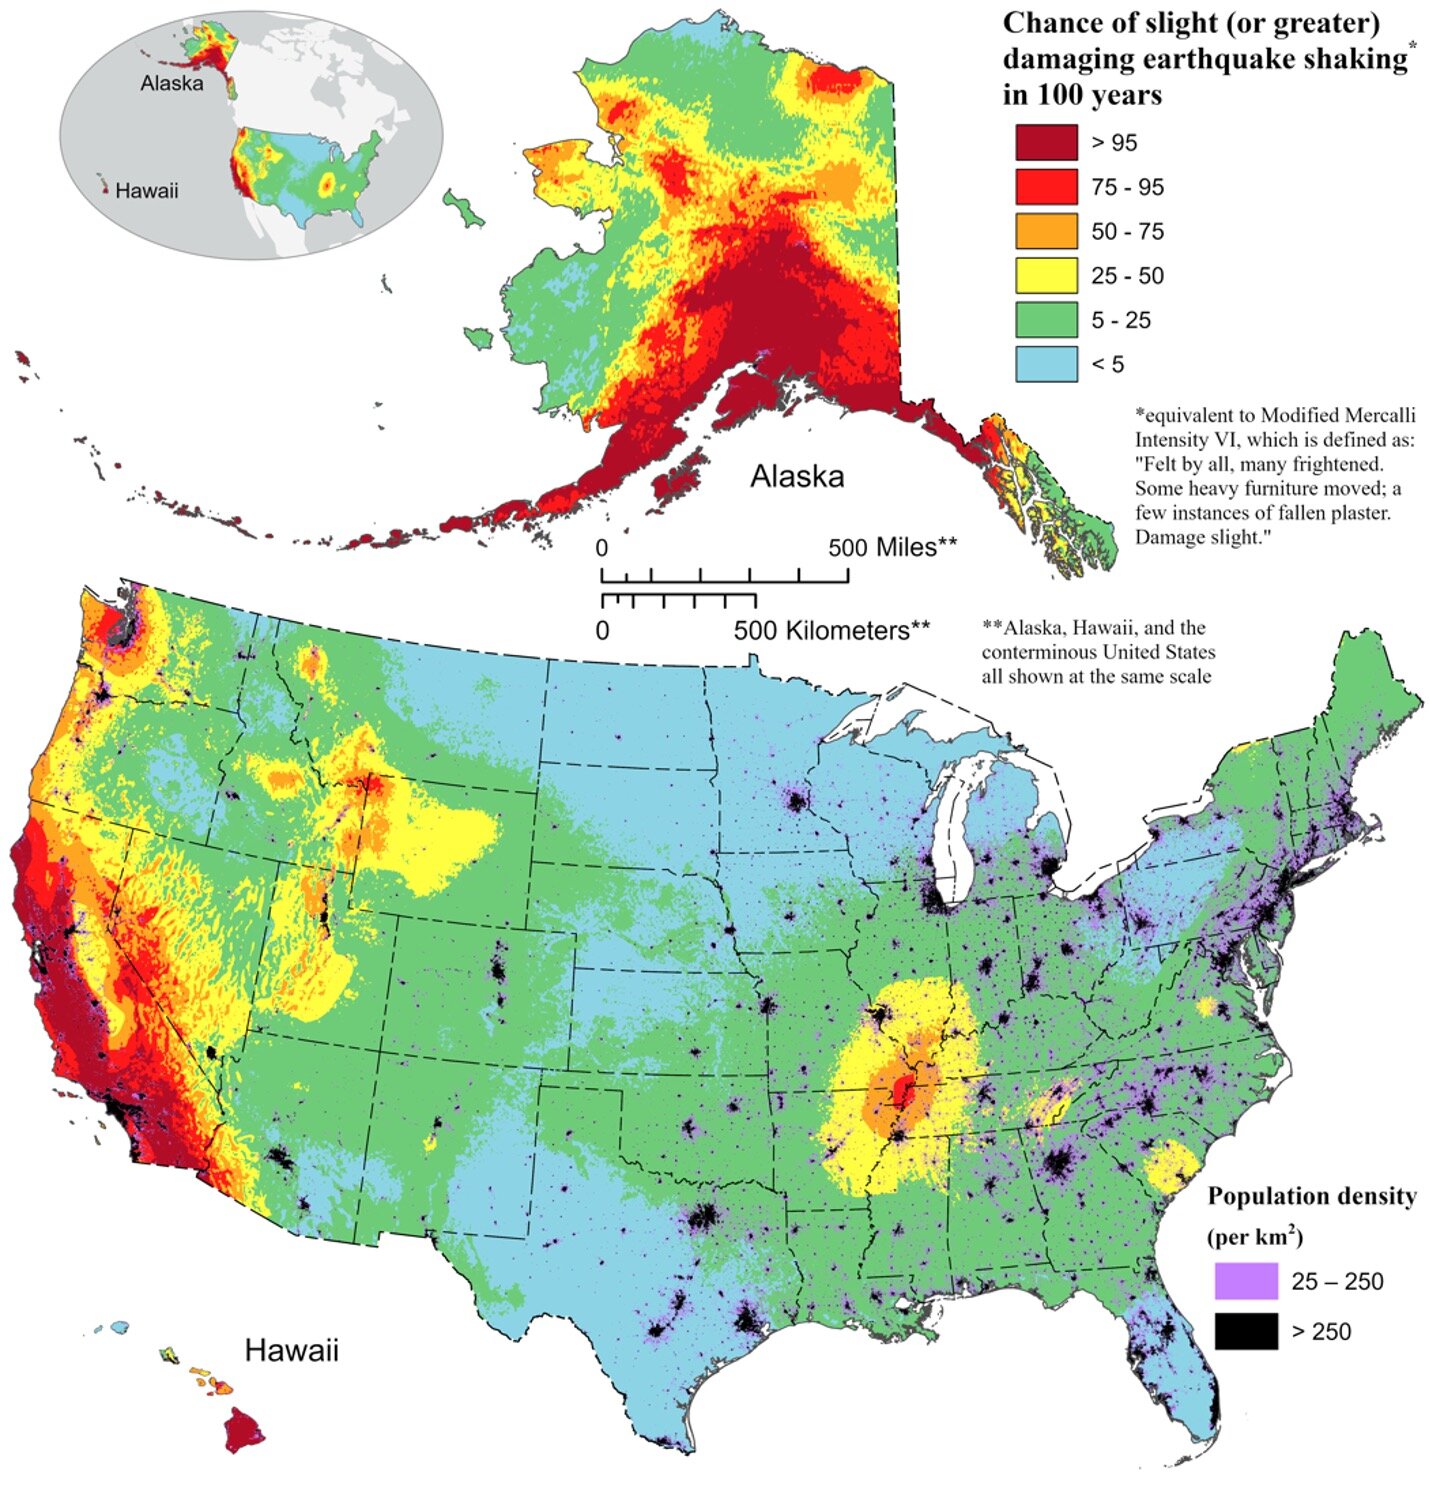 New USGS map shows where damaging earthquakes are most likely to occur in US 